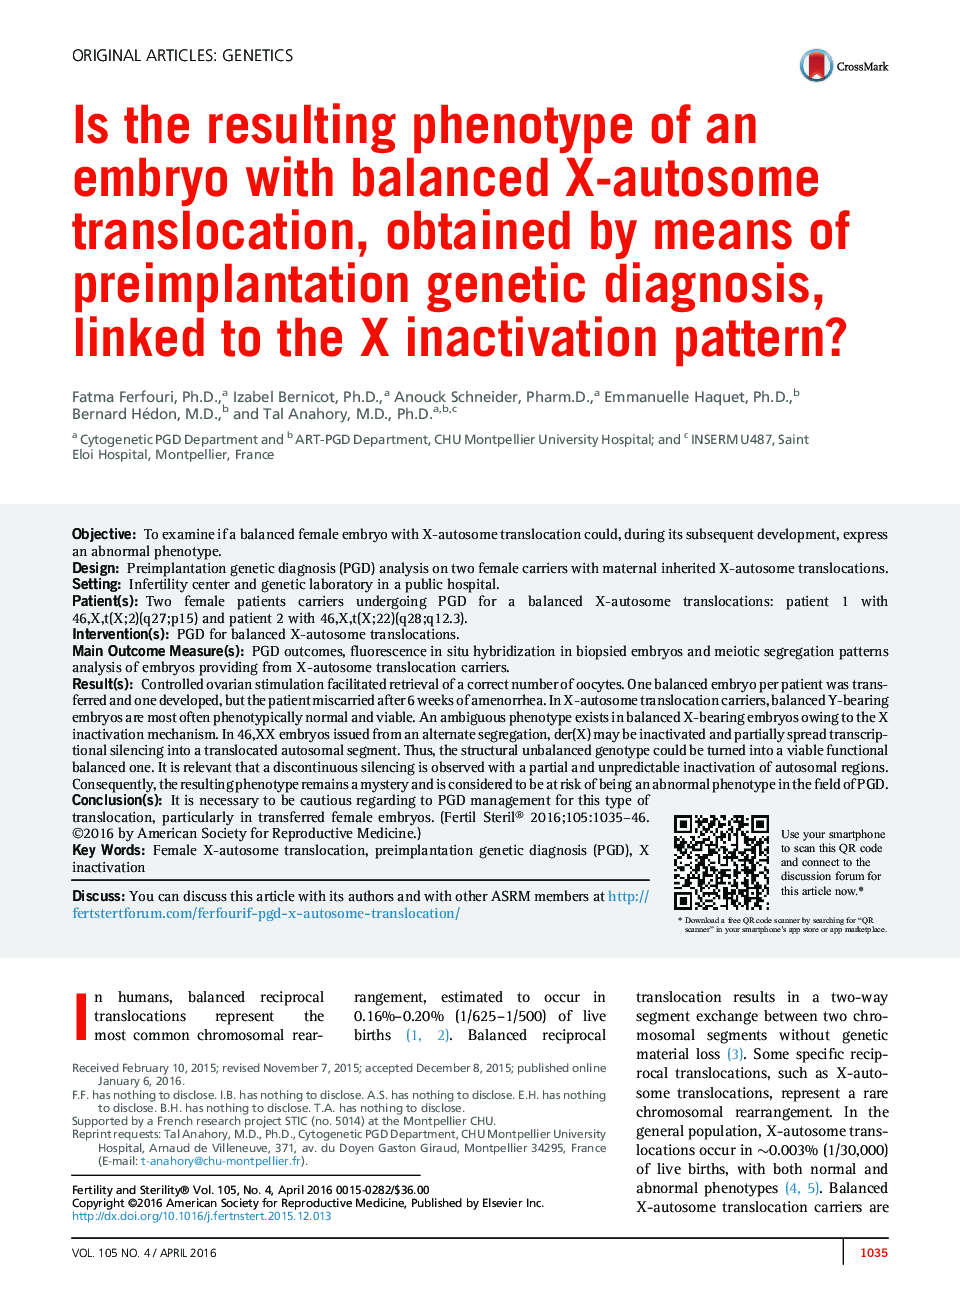 Is the resulting phenotype of an embryo with balanced X-autosome translocation, obtained by means of preimplantation genetic diagnosis, linked to the X inactivation pattern? 